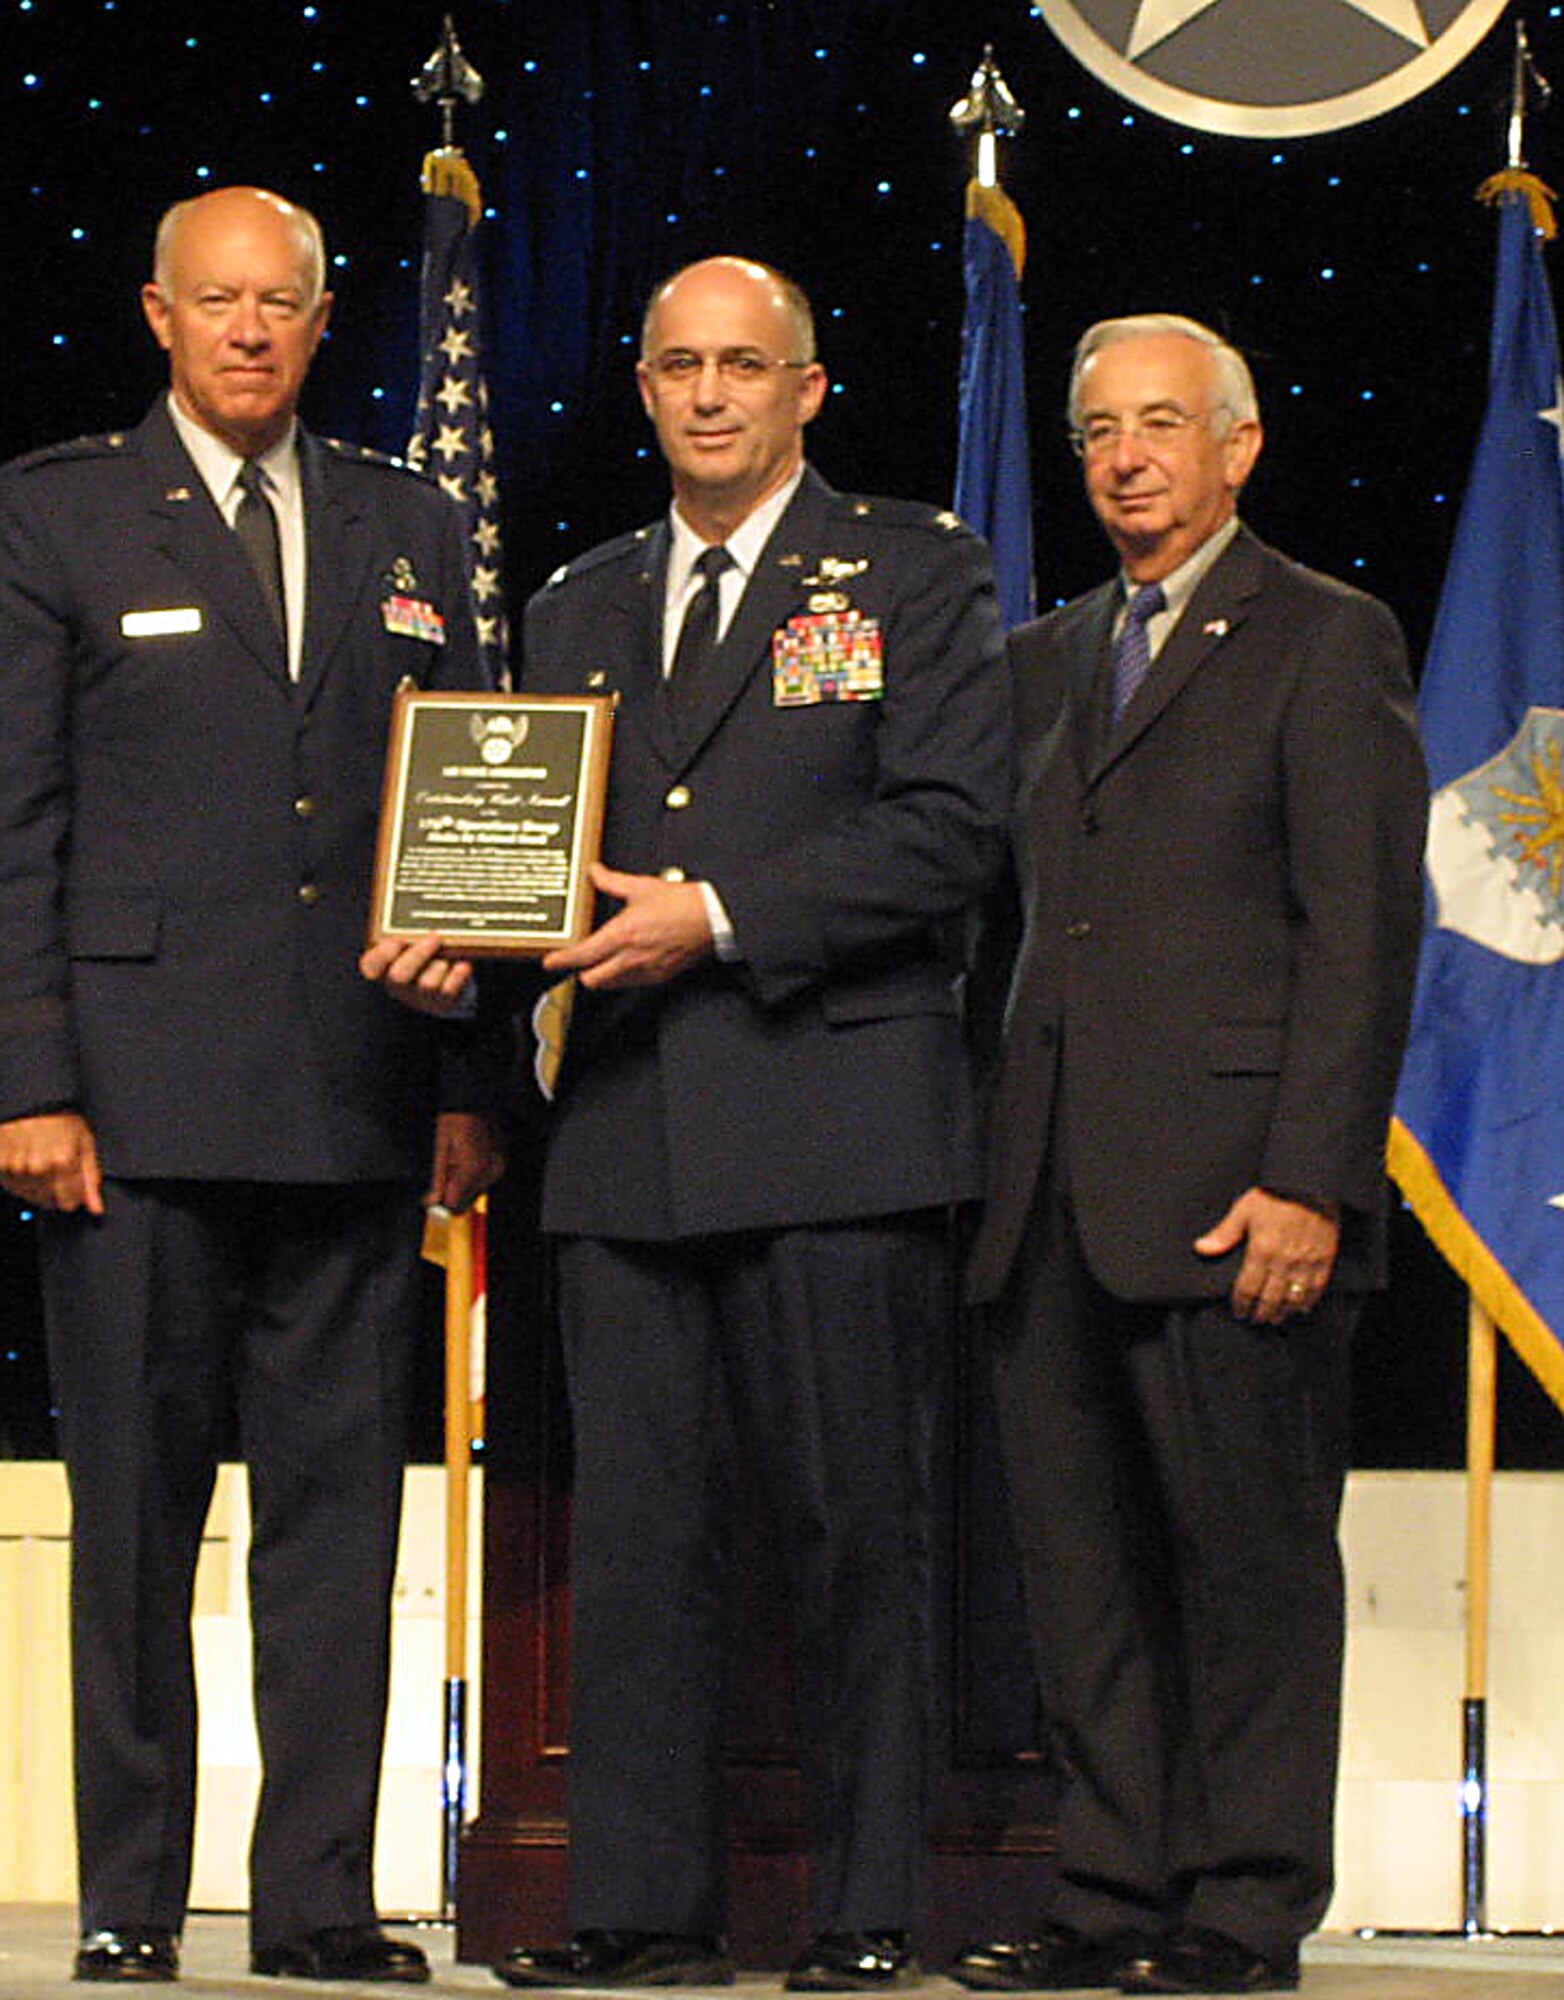 Col. Carlisle A. Lincoln,  commander of the Alaska Air National Guard's 176th Operations Group, accepts the Air Force Association's 2010 Outstanding Air National Guard Unit of the Year award Sept. 13, 2010 in Washington D.C. Michael M. Dunn (right), the Air Force Association president, and Lt. Gen. Harry M. Wyatt III, the Air National Guard director, present the award.